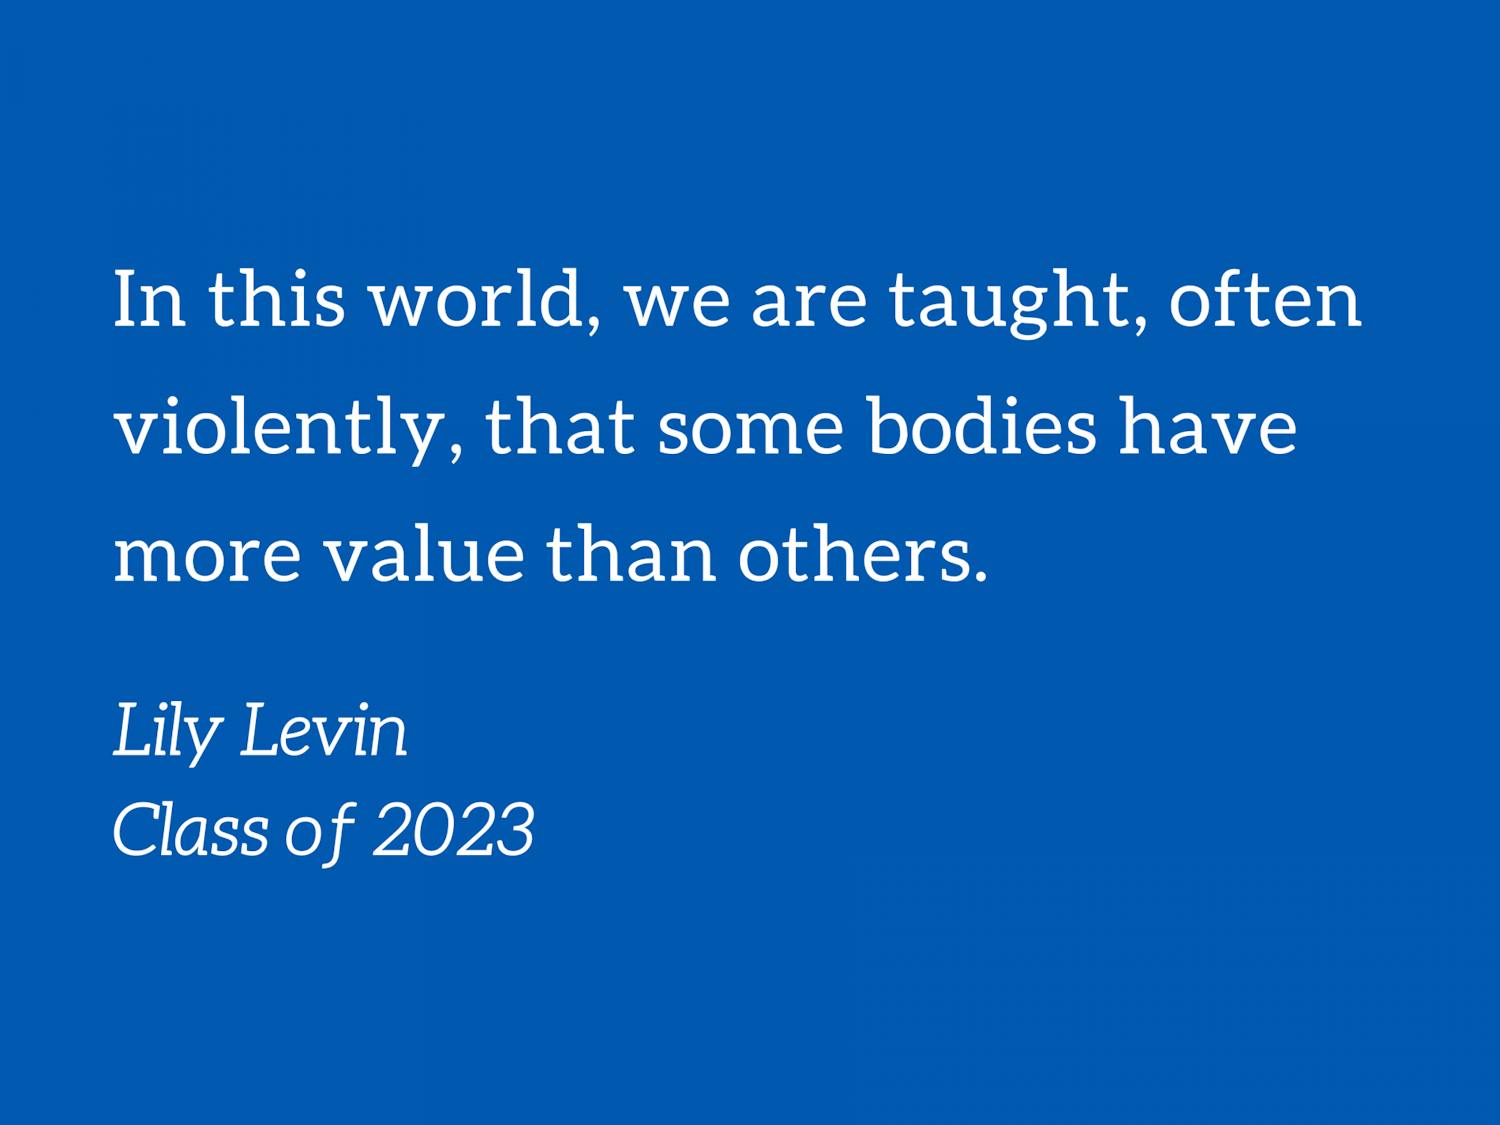 010221-levin-quote.png